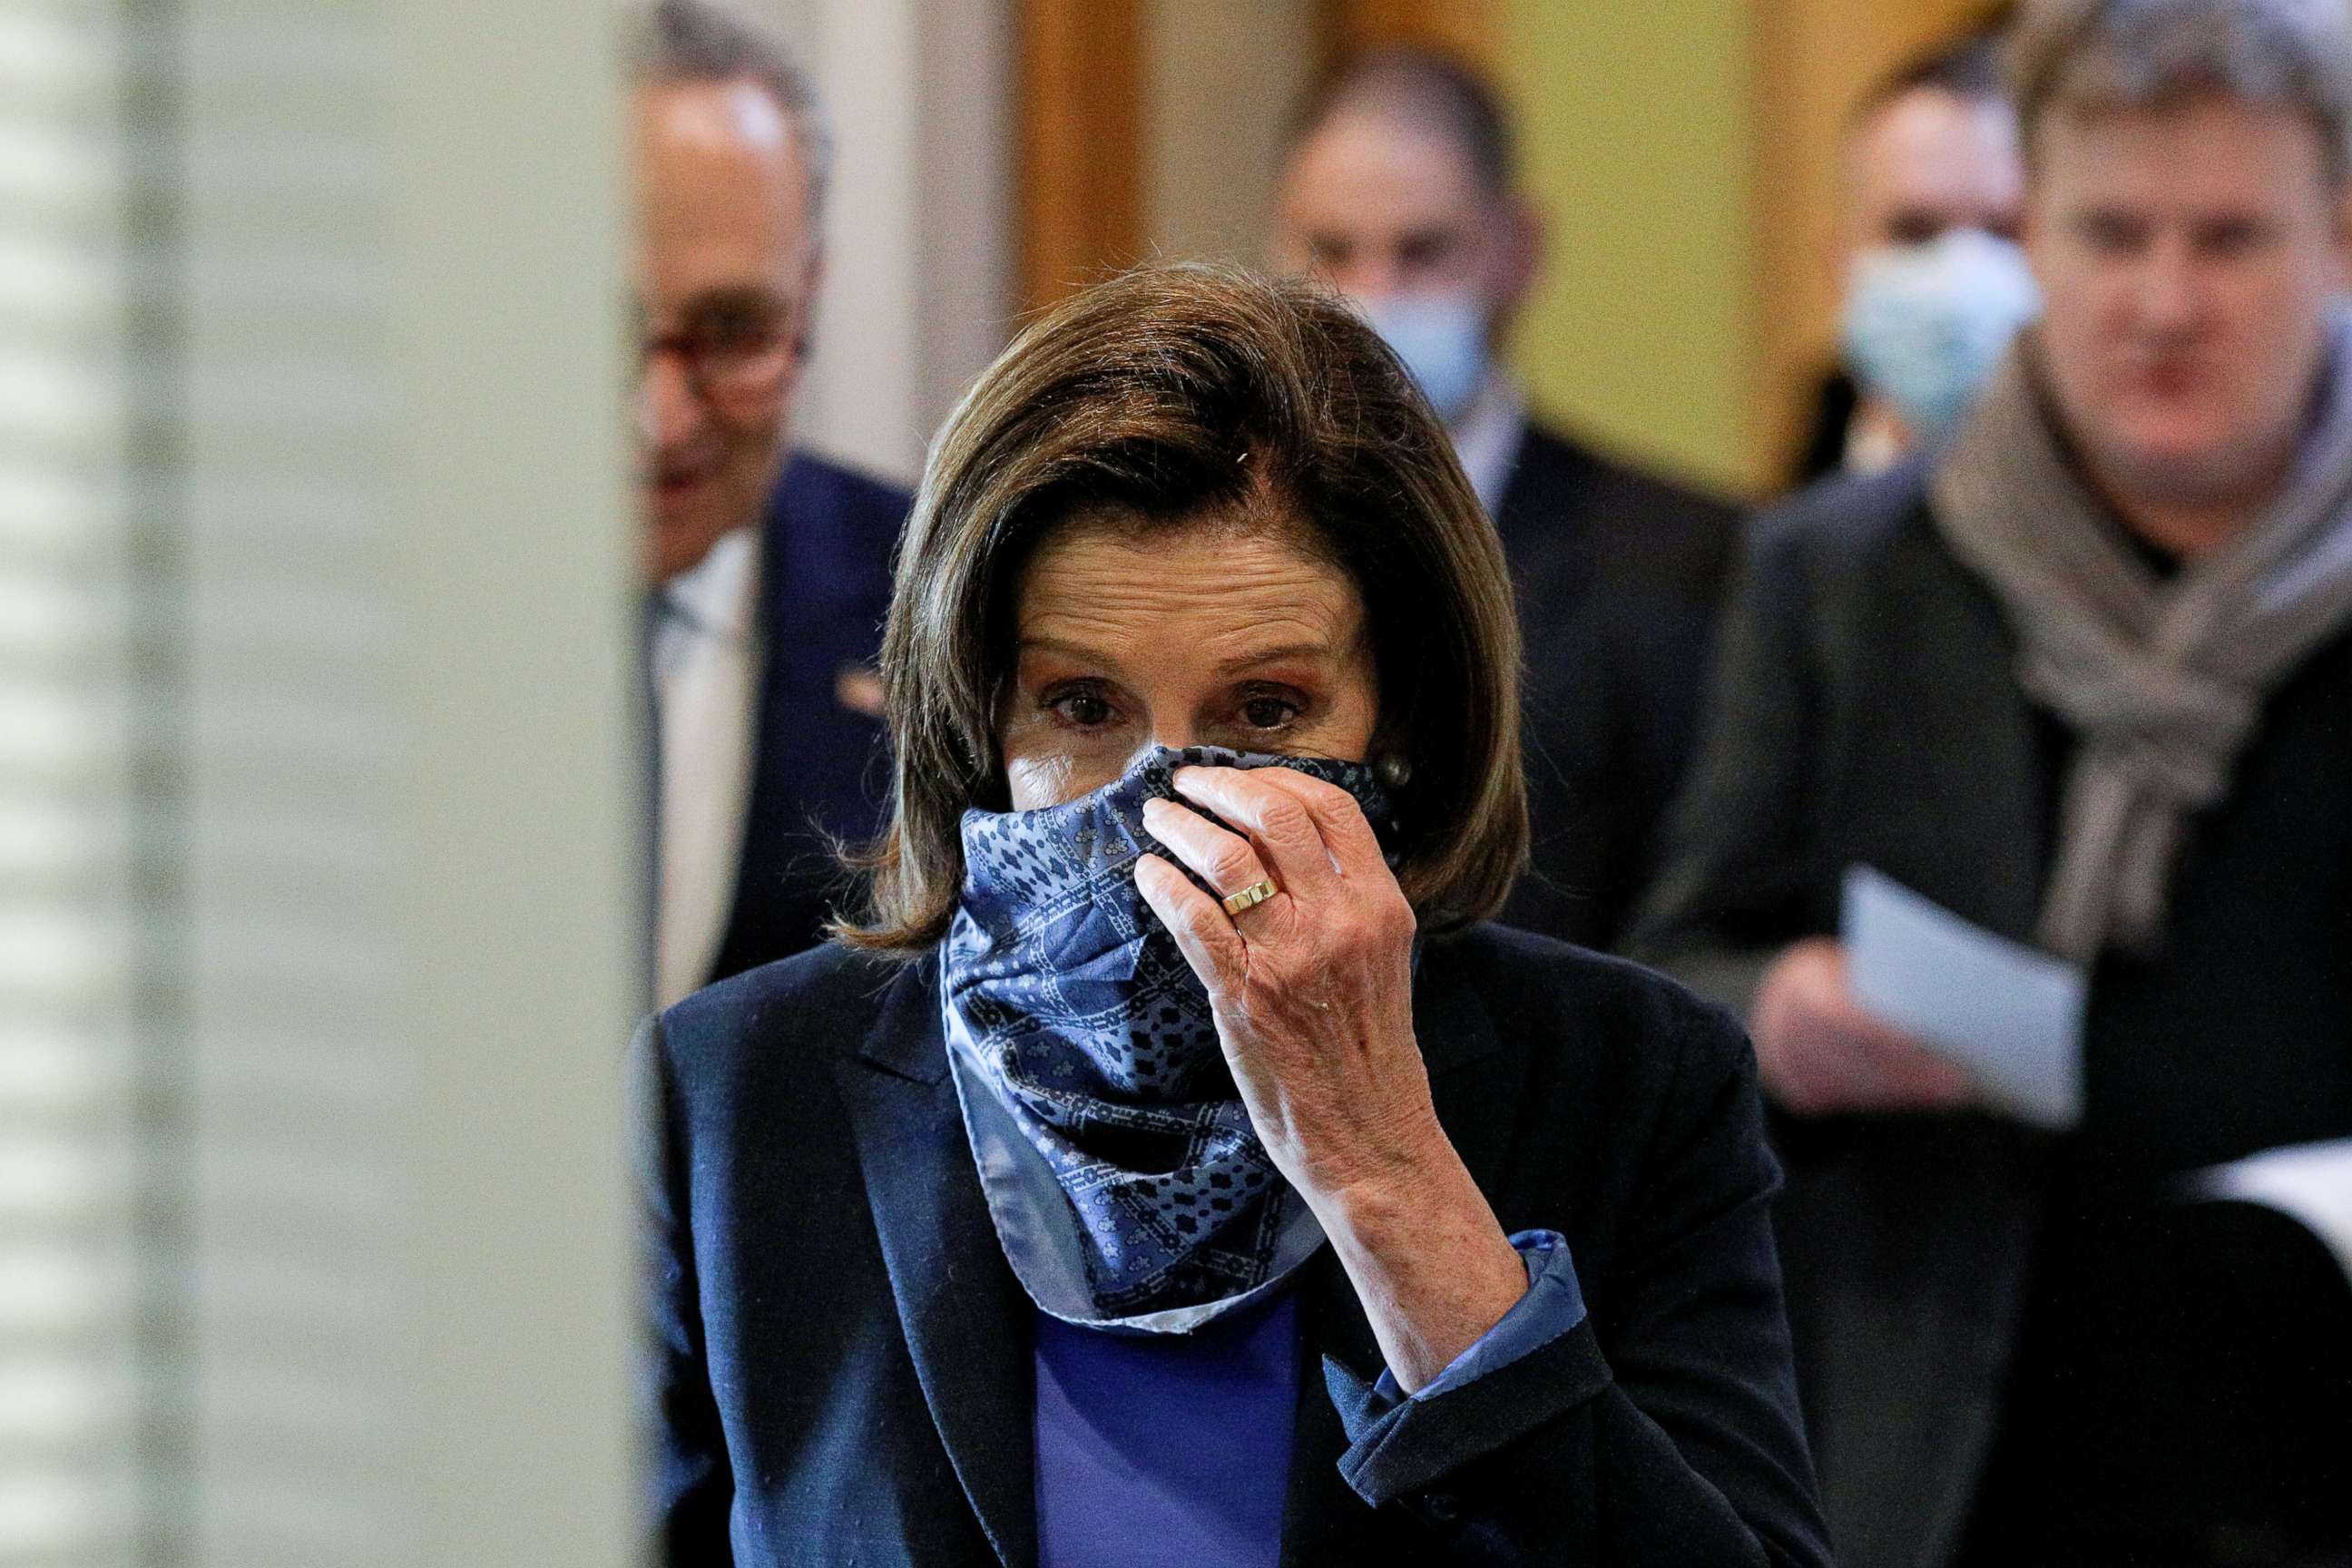 PHOTO: Speaker of the House Nancy Pelosi adjusts her face mask as she arrives inside the U.S. Capitol in Washington, April 21, 2020.